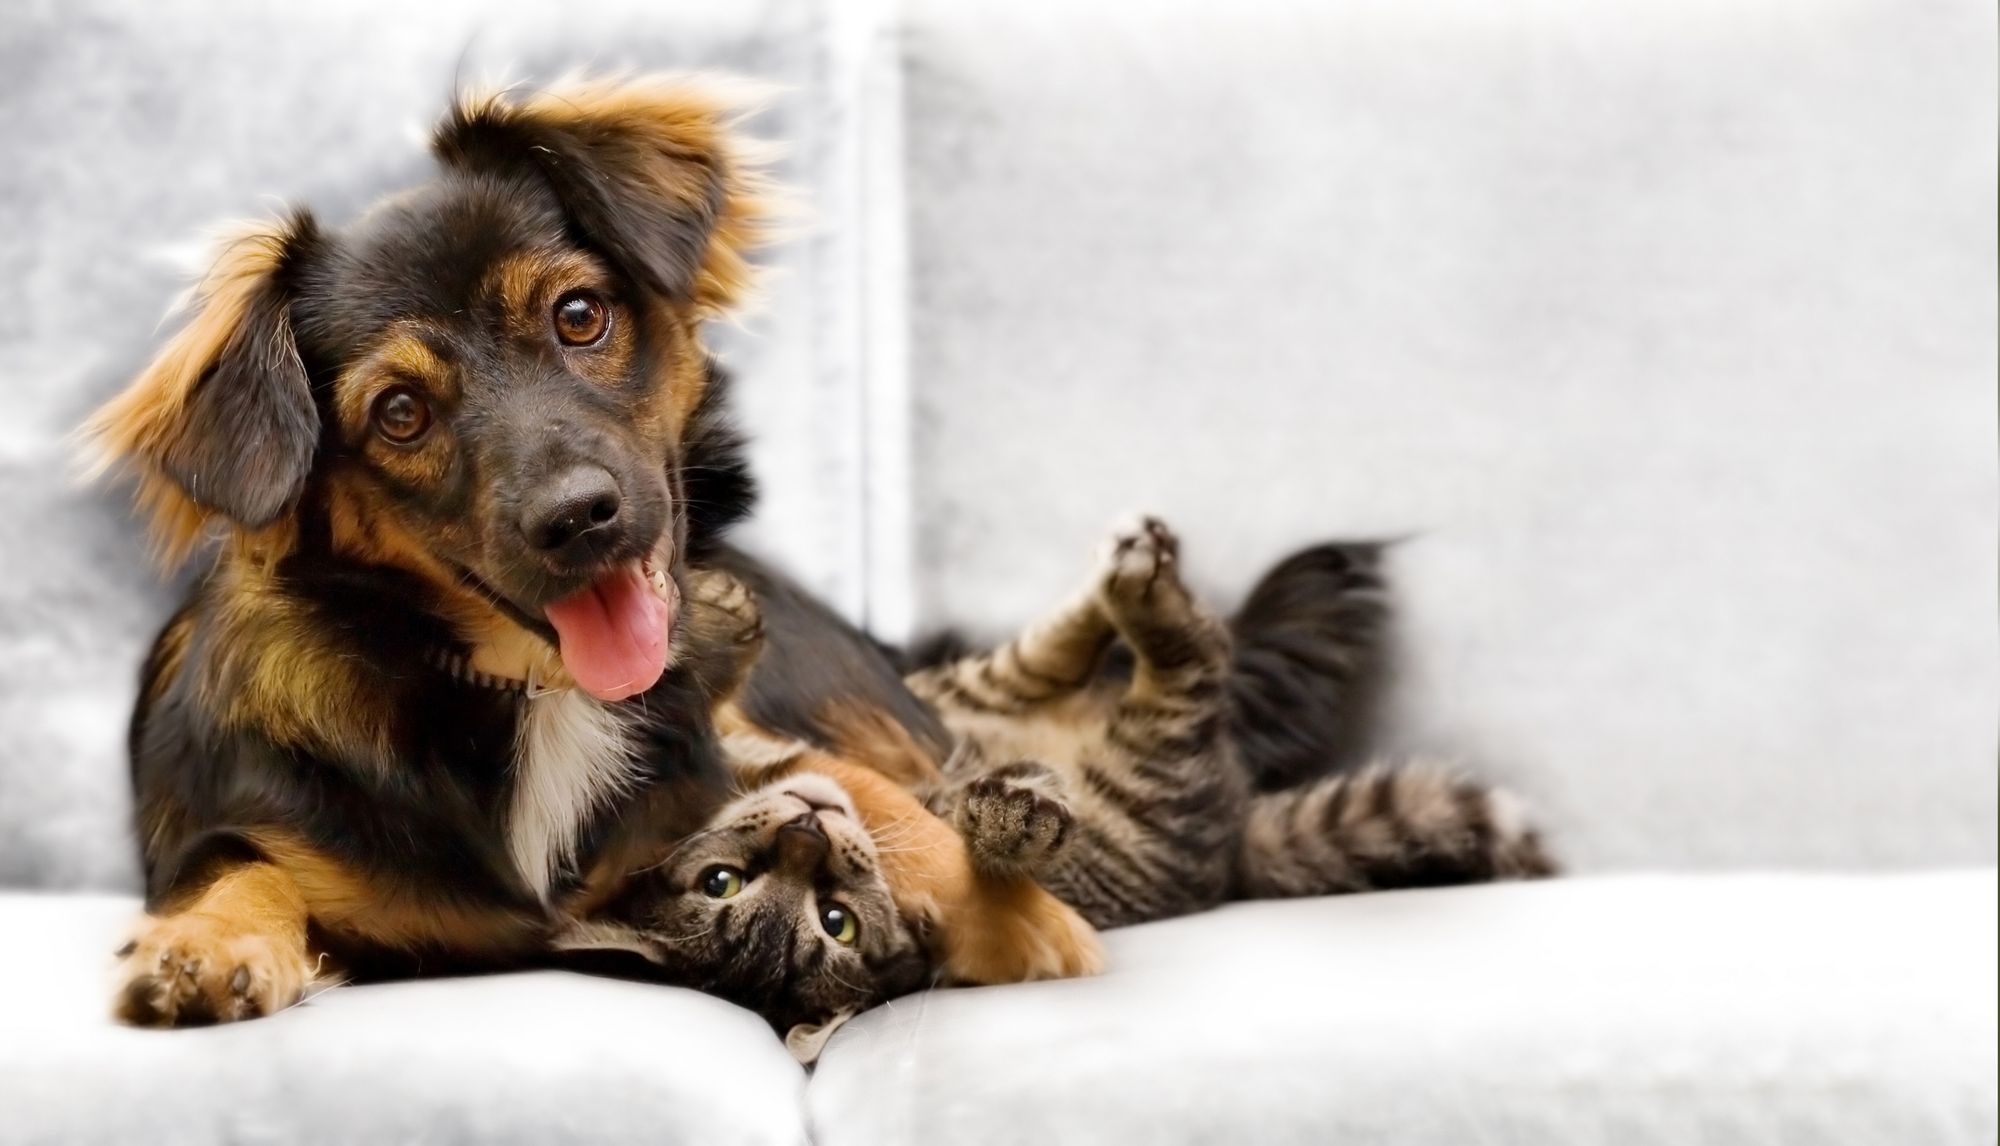 Image of a dog and a cat on a couch